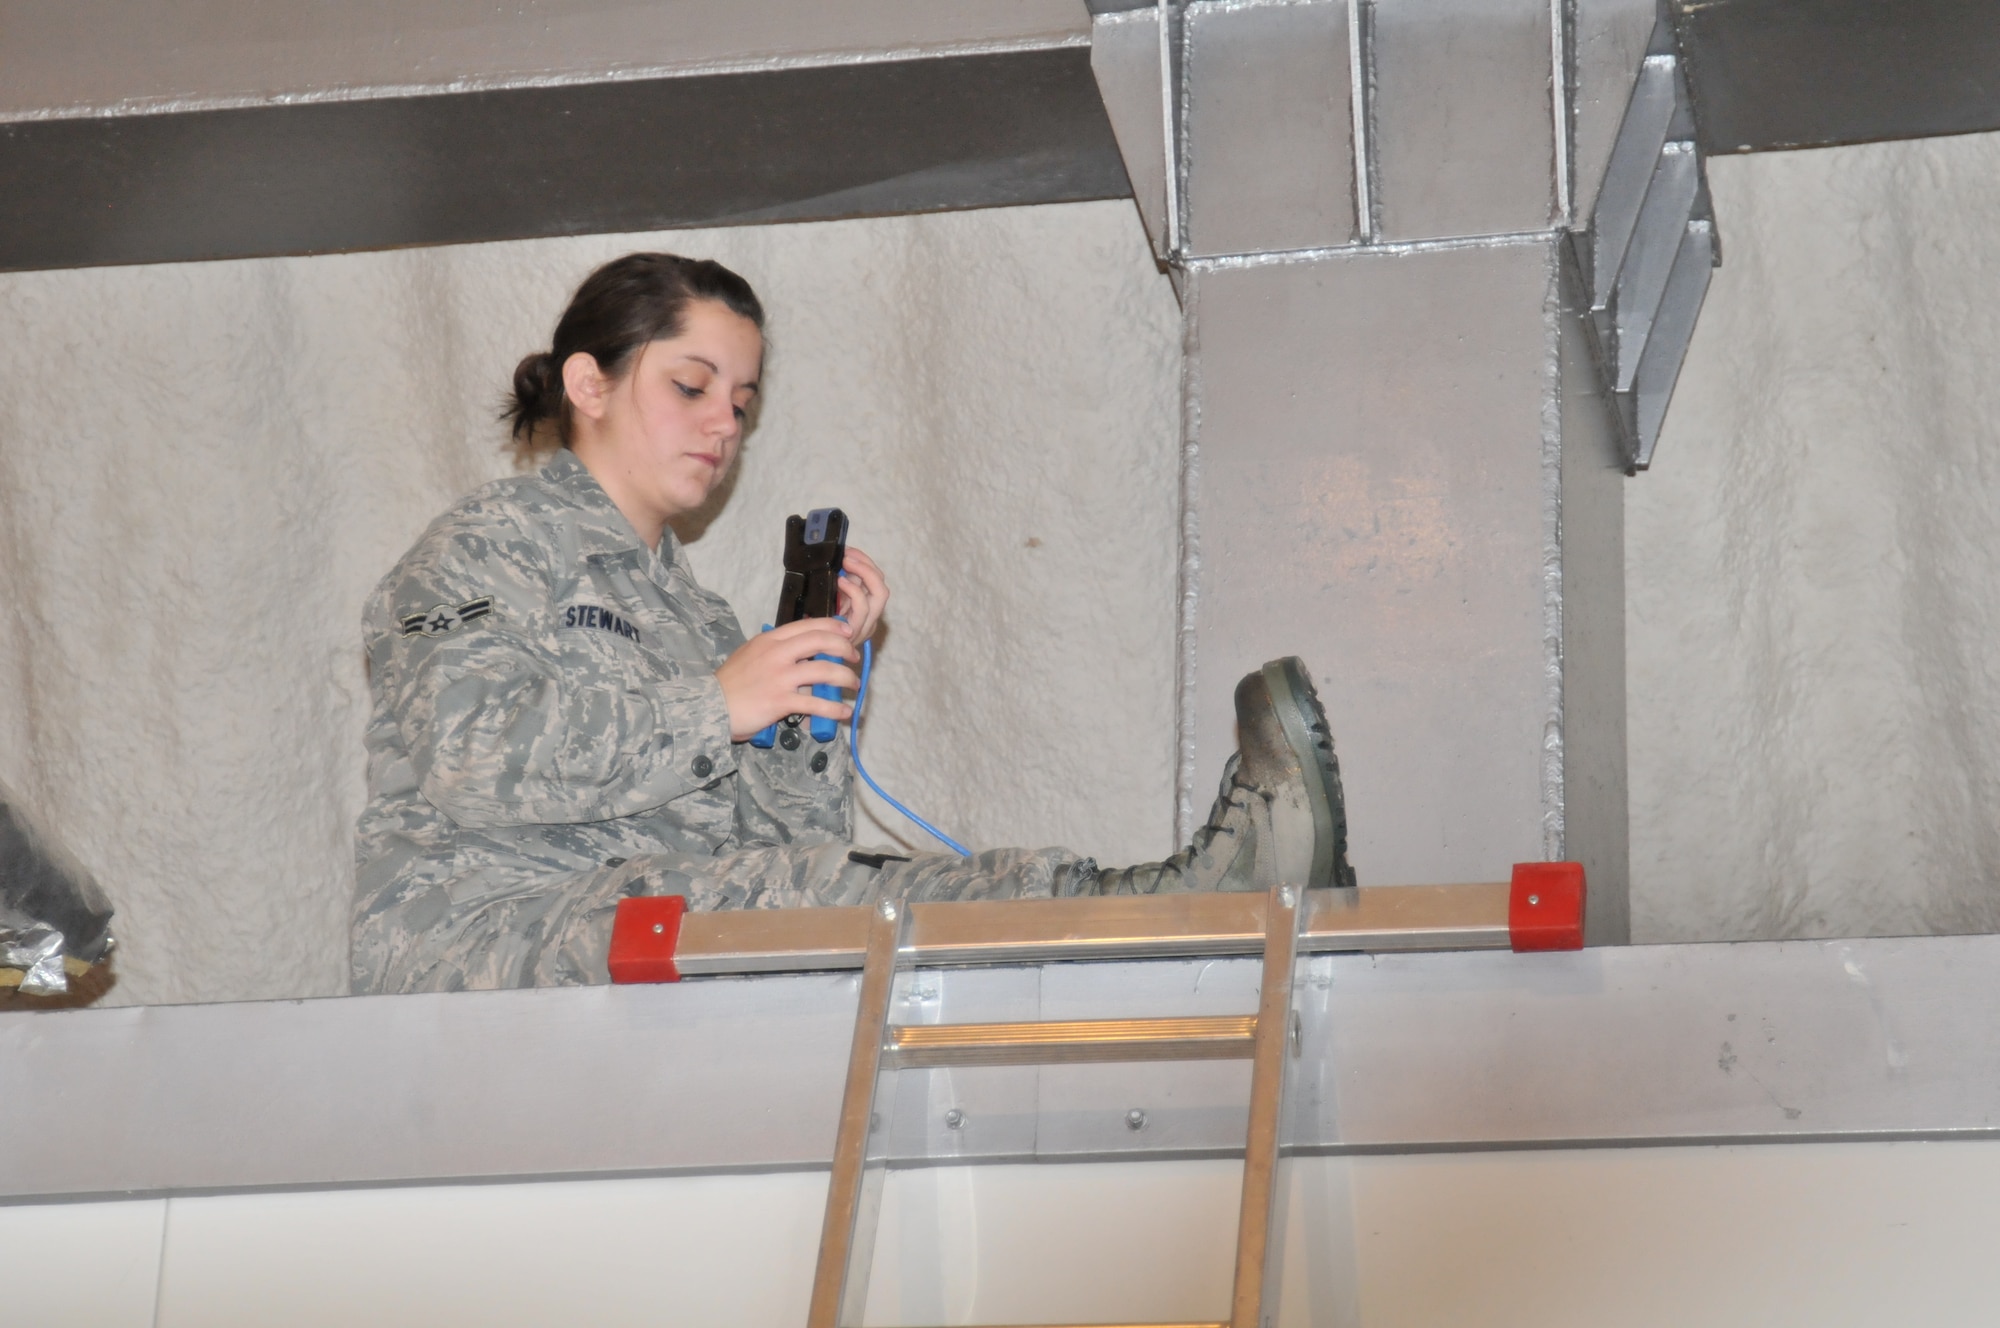 Airman Brittani Stewart of the 1st Combat Communications Squadron from Ramstein Air Base, Germany, installs cable infrastructure for maintenance personnel during preparations for Operation Golden Lance on Campia Turzii Air Base, Romania. The 1st CBCS was responsible for installing all official Internet and phone links for the American personnel participating in the exercise. (U.S. Air Force photo/Senior Airman David Dobrydney)